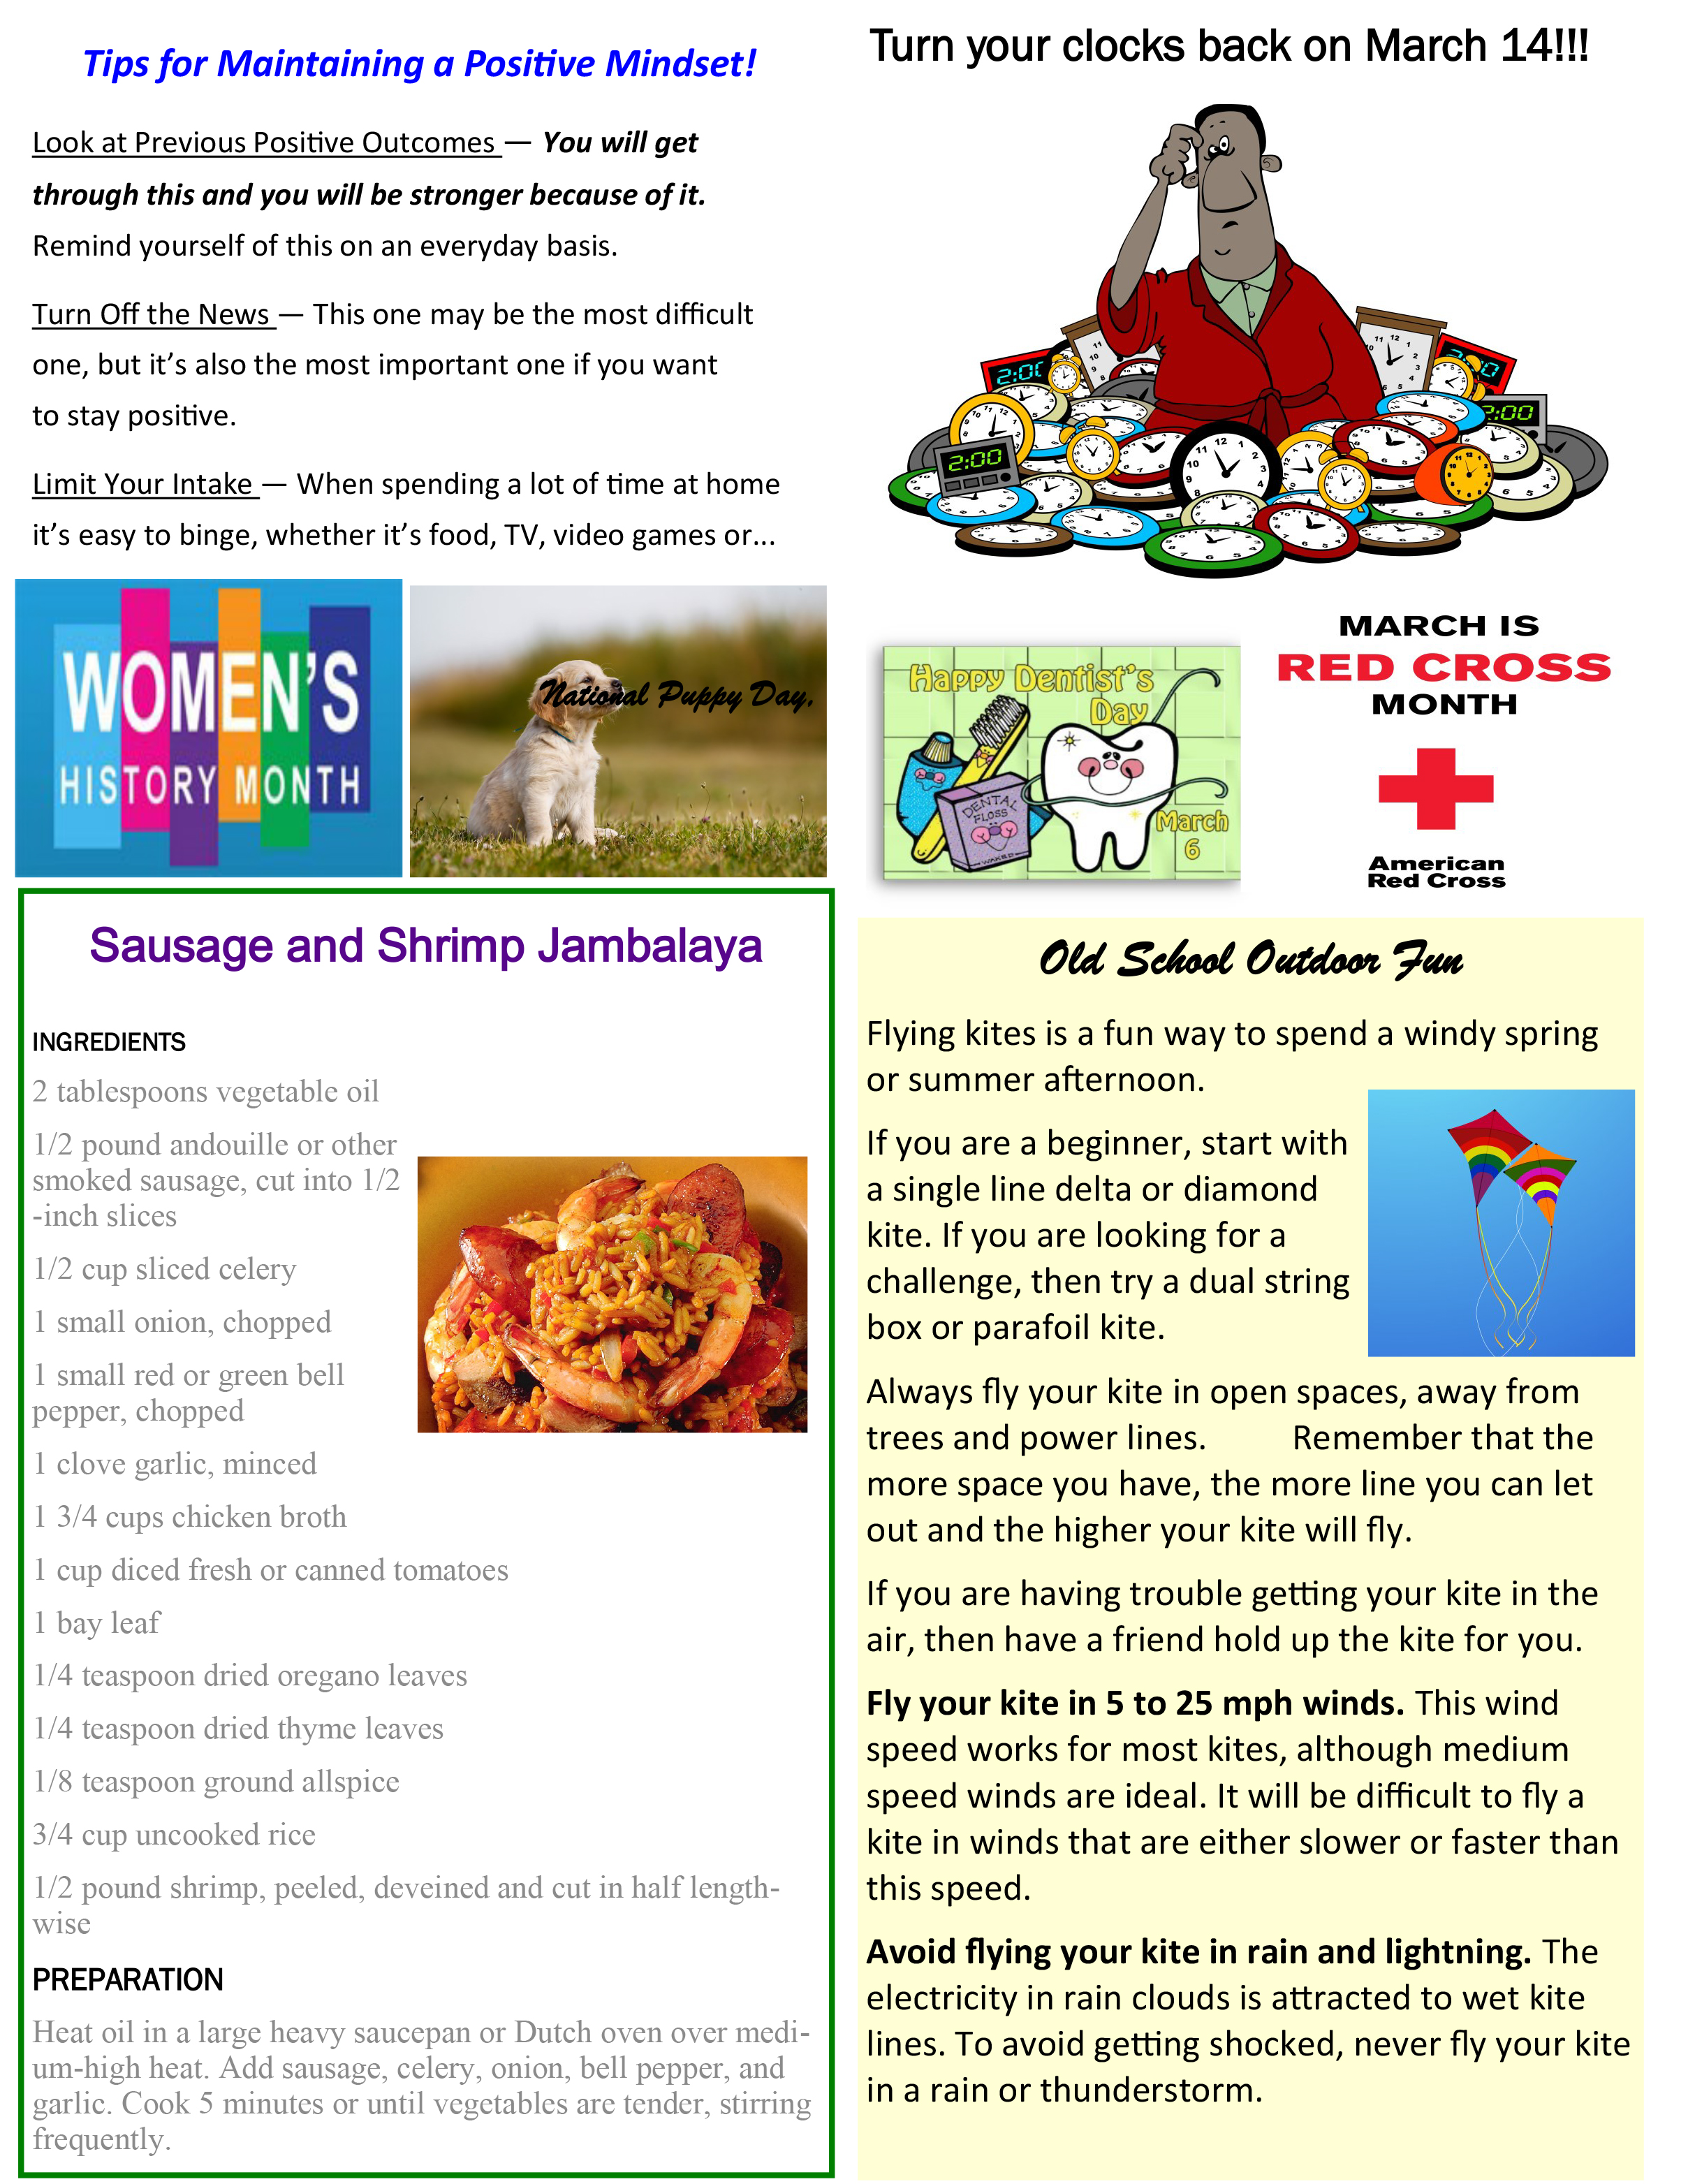 March Newsletter Image 2